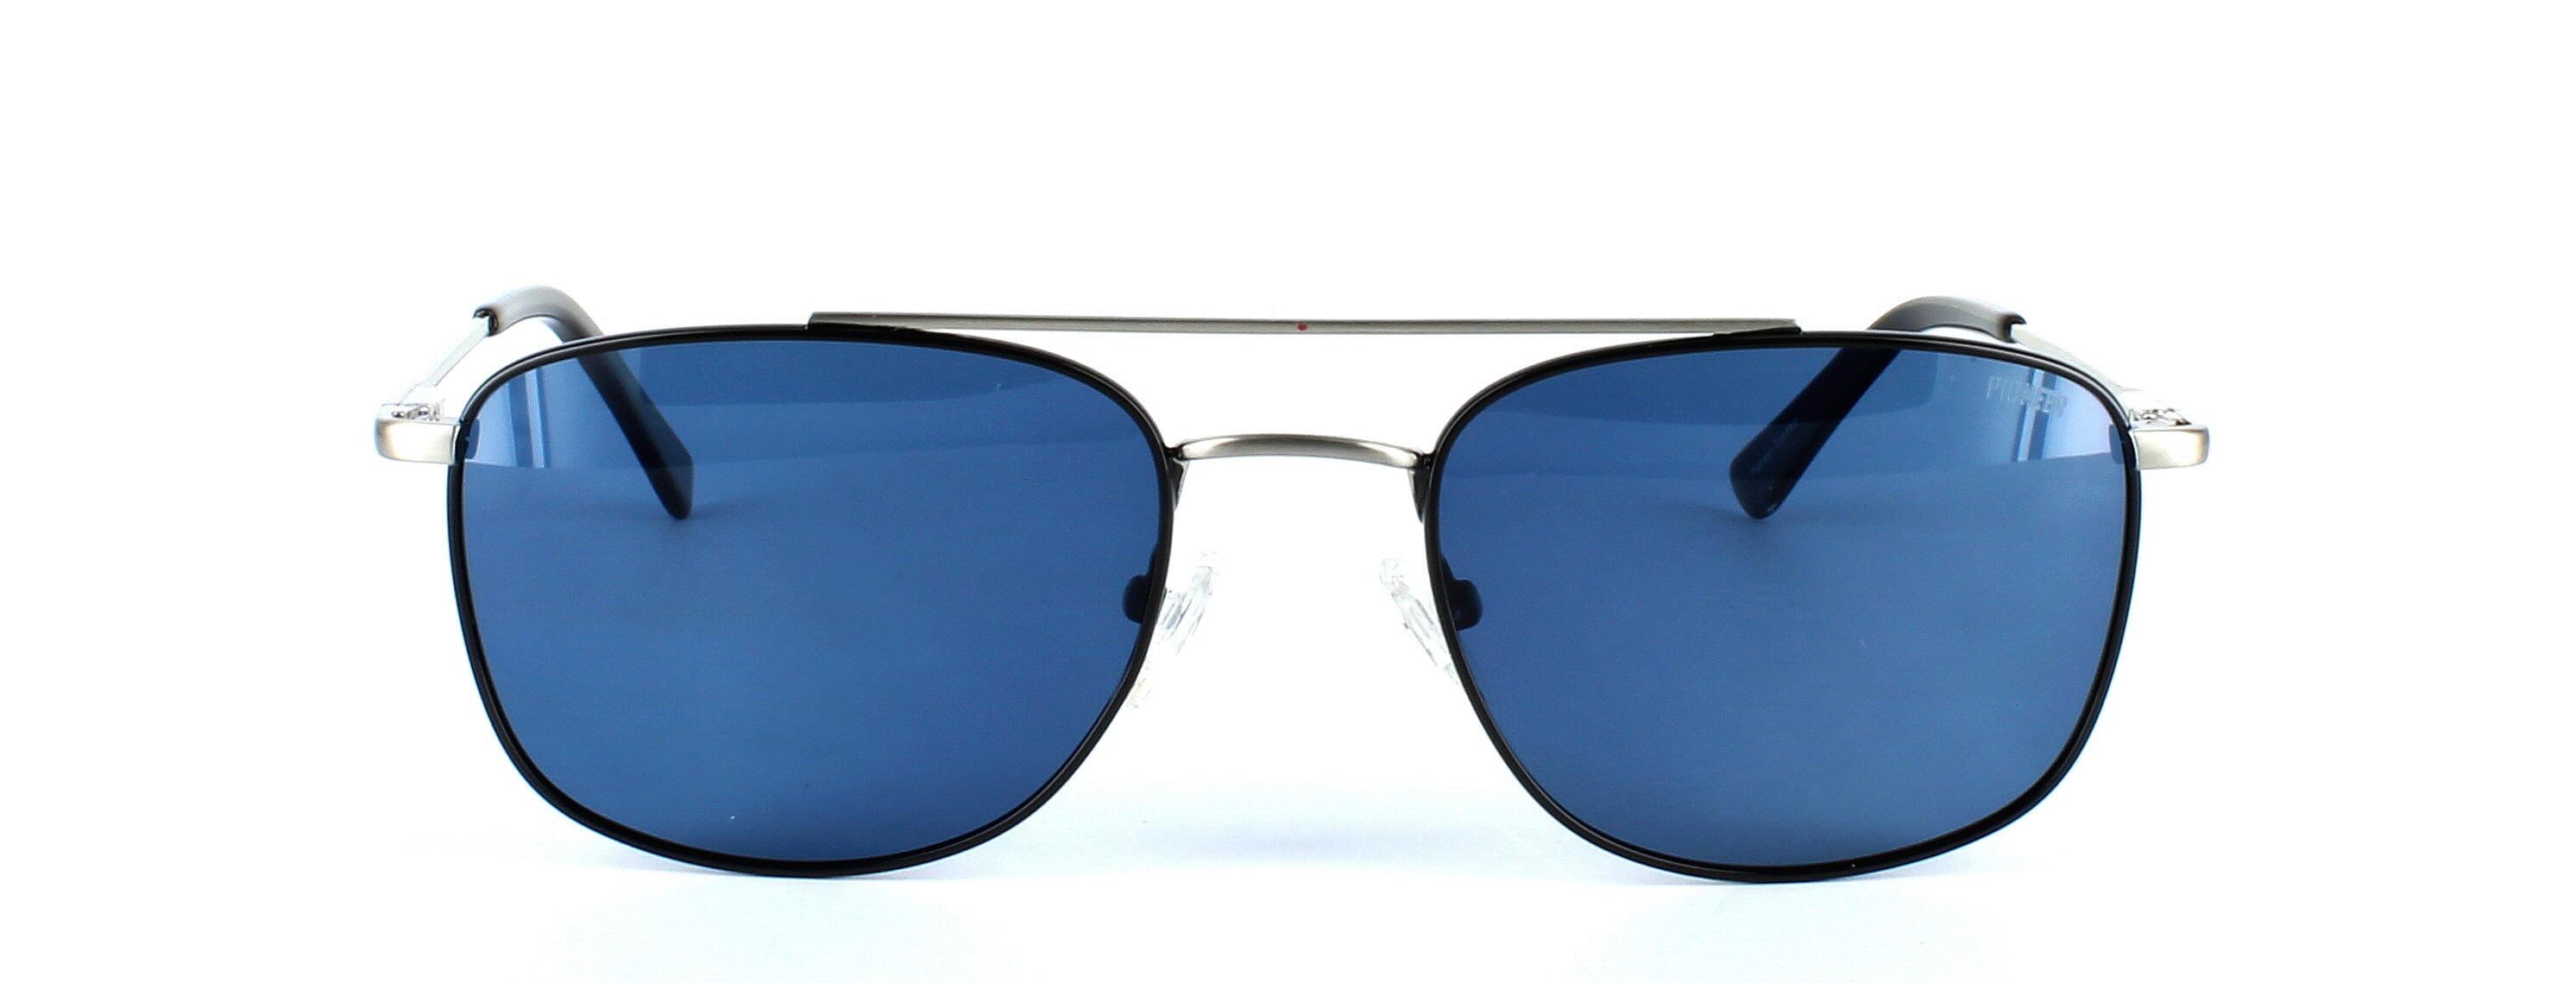 Carlo - Unisex 2-tone aviator style sunglasses here in black and silver - image view 5